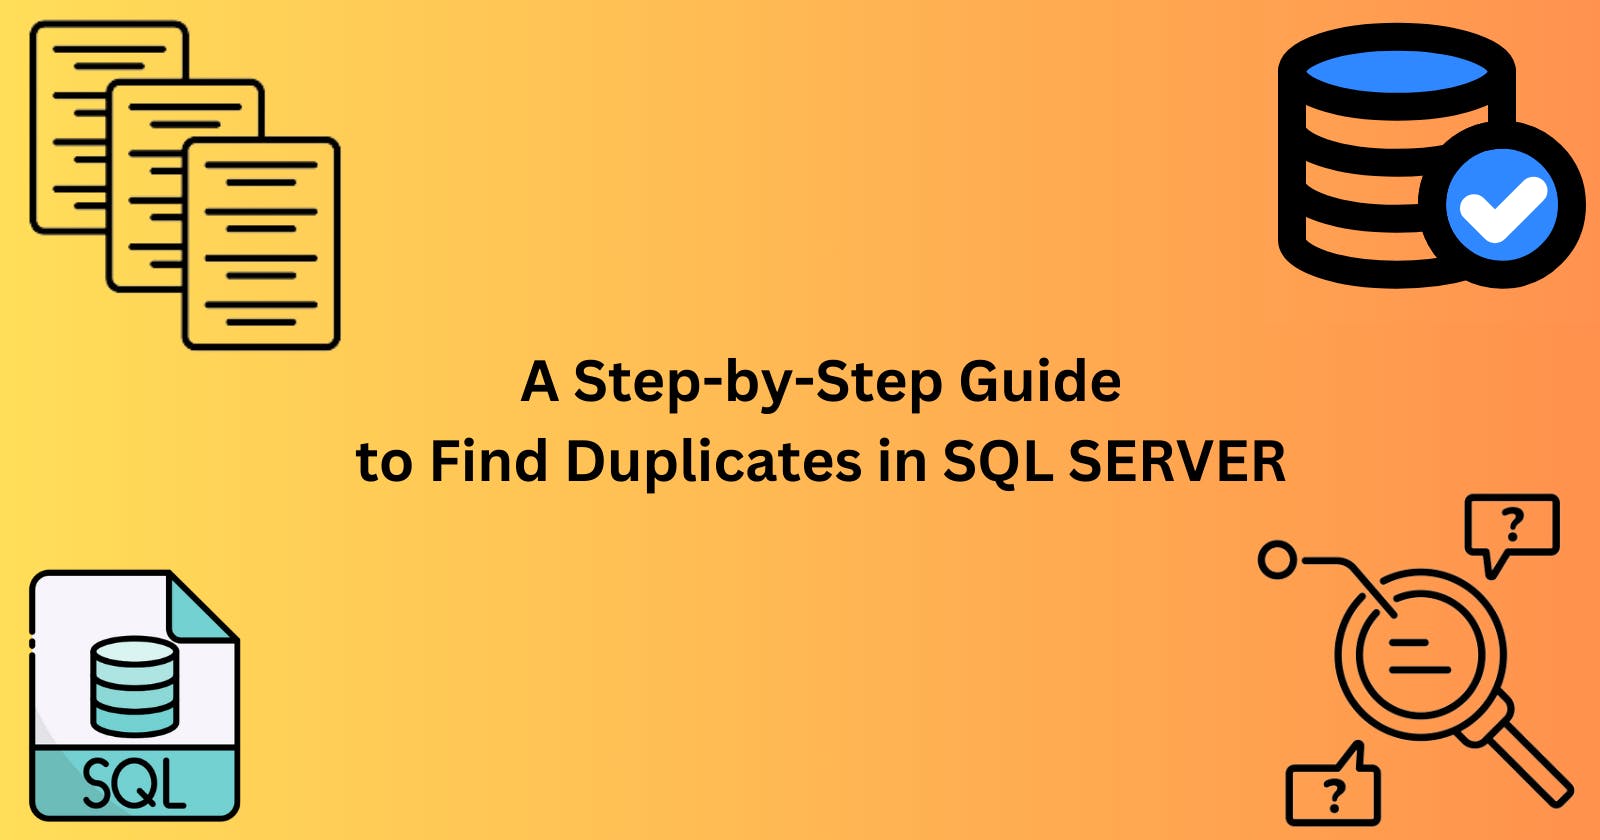 How to Find Duplicates in SQL SERVER: A Step-by-Step Guide